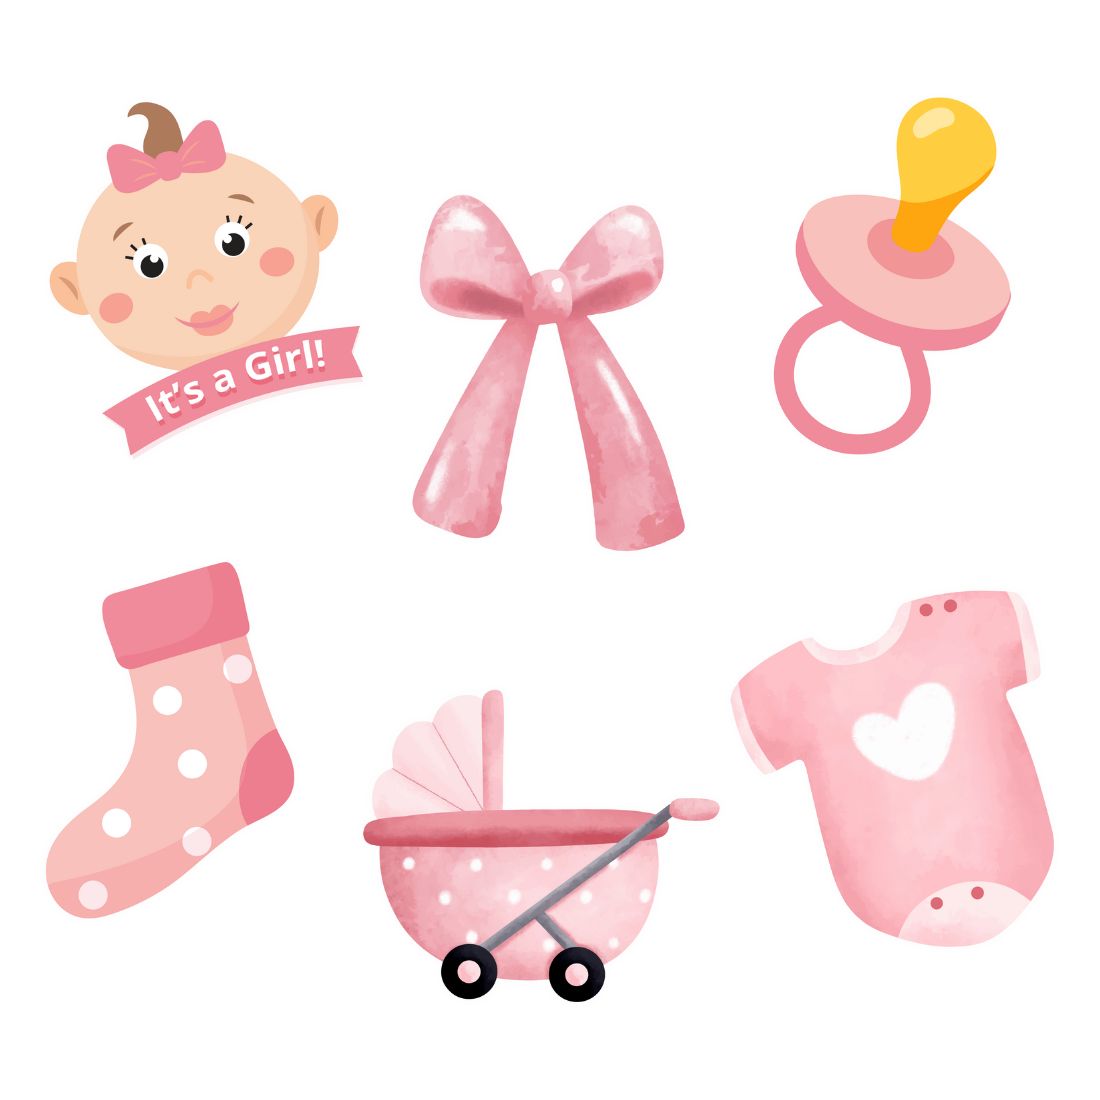 Baby Girl Theme Cutout - (6 inches/250 GSM Cardstock/Pink & Lightpink/12Pcs)